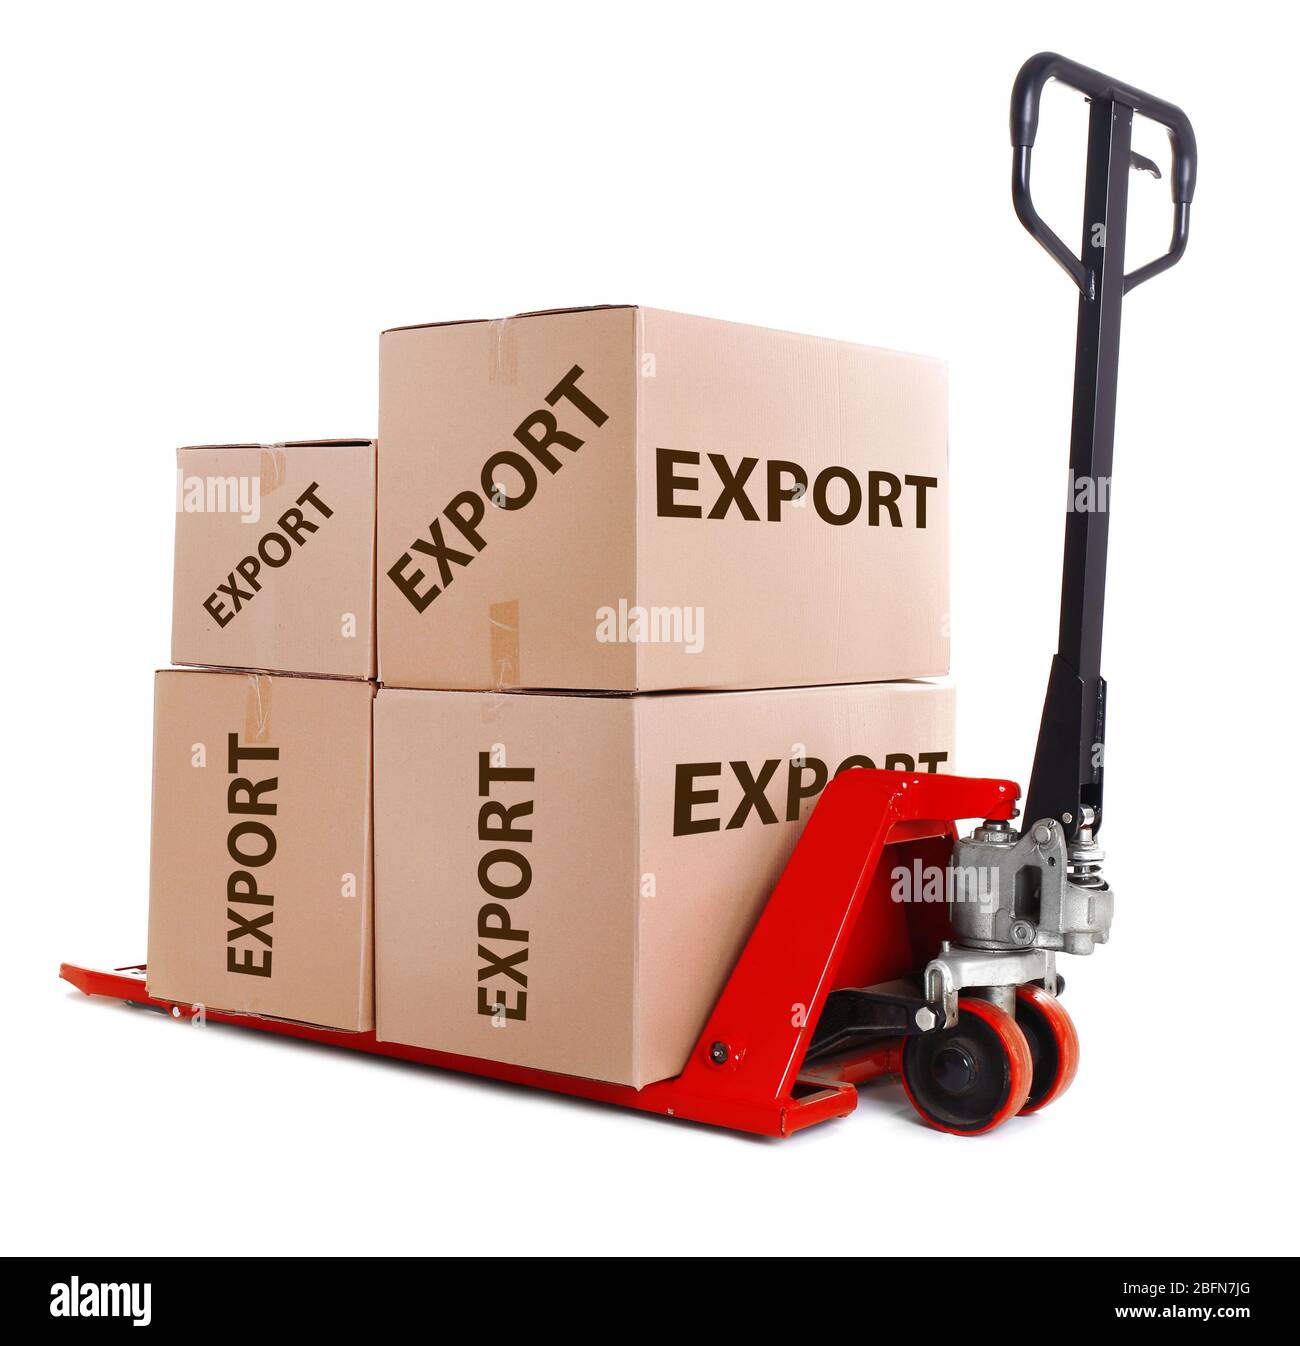 Fork pallet truck with carton boxes and text Export isolated on white Stock Photo